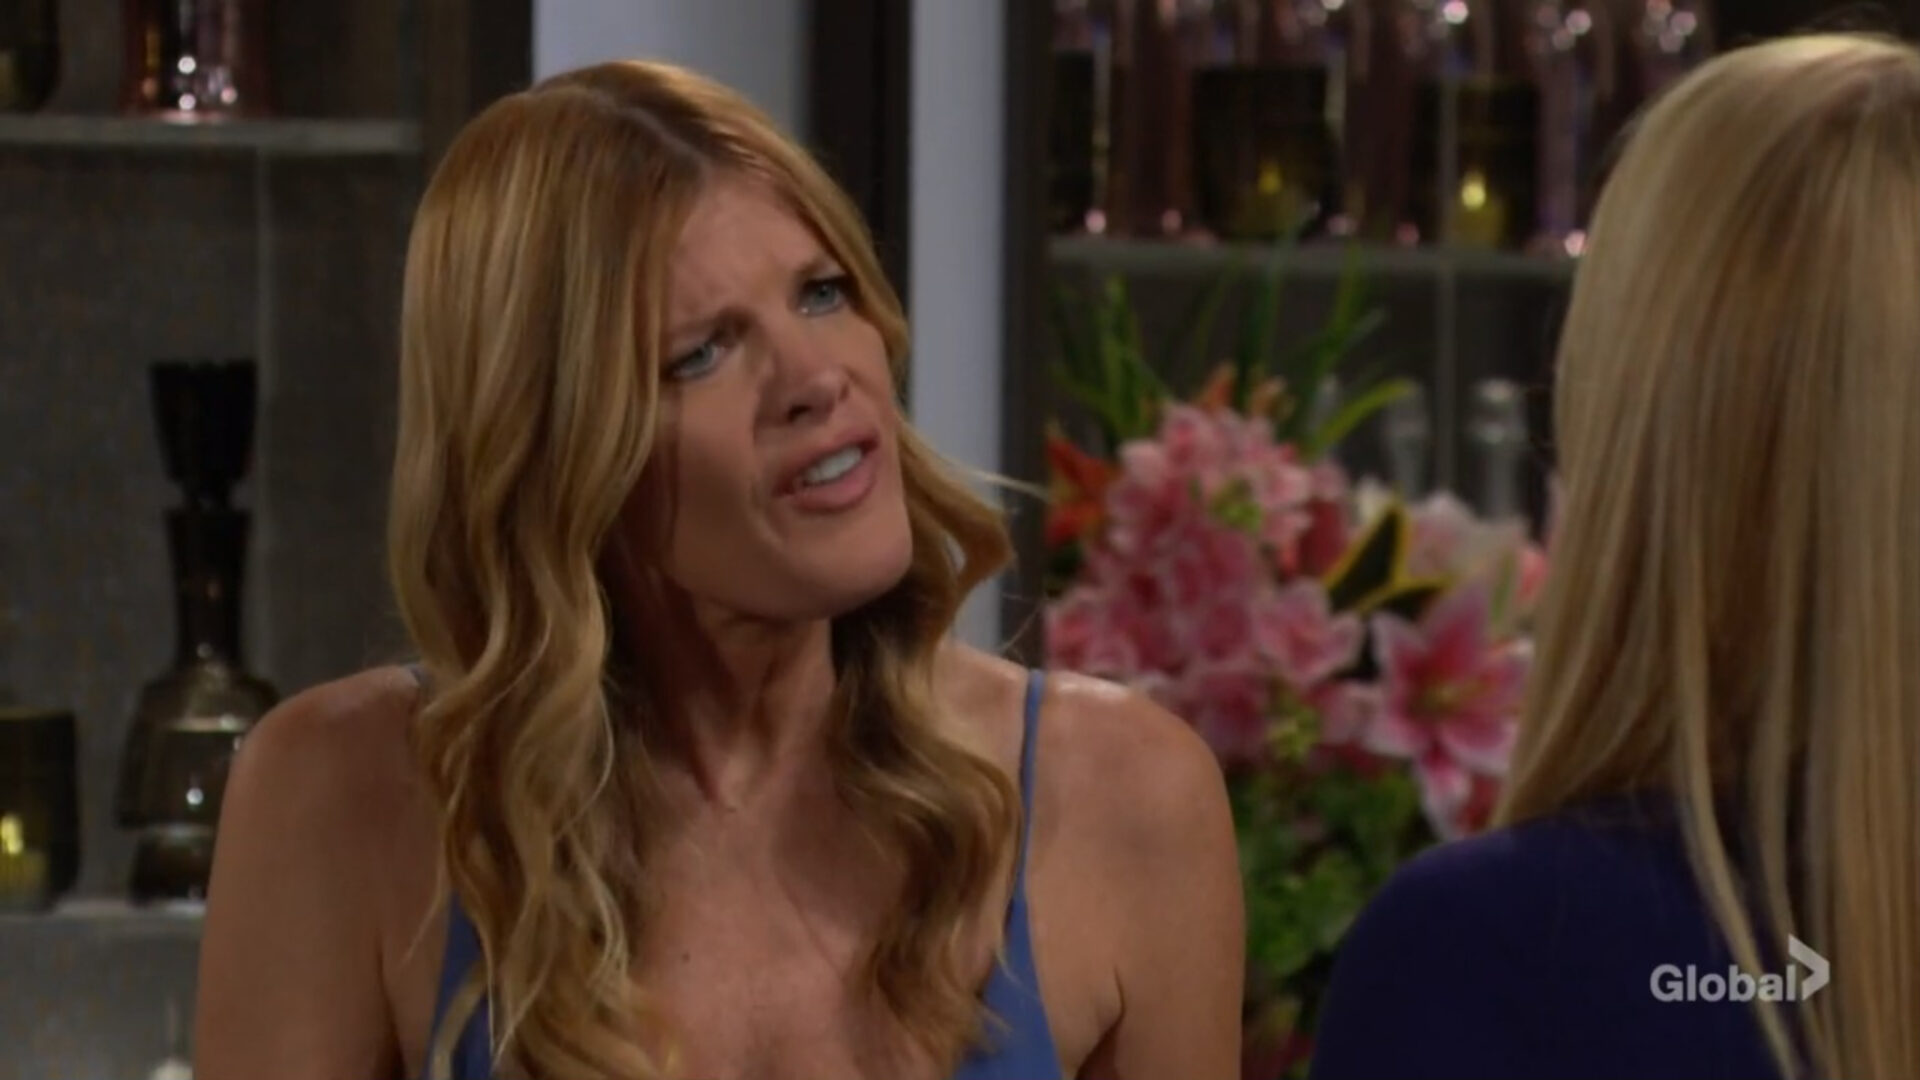 phyllis talks tarred young restless